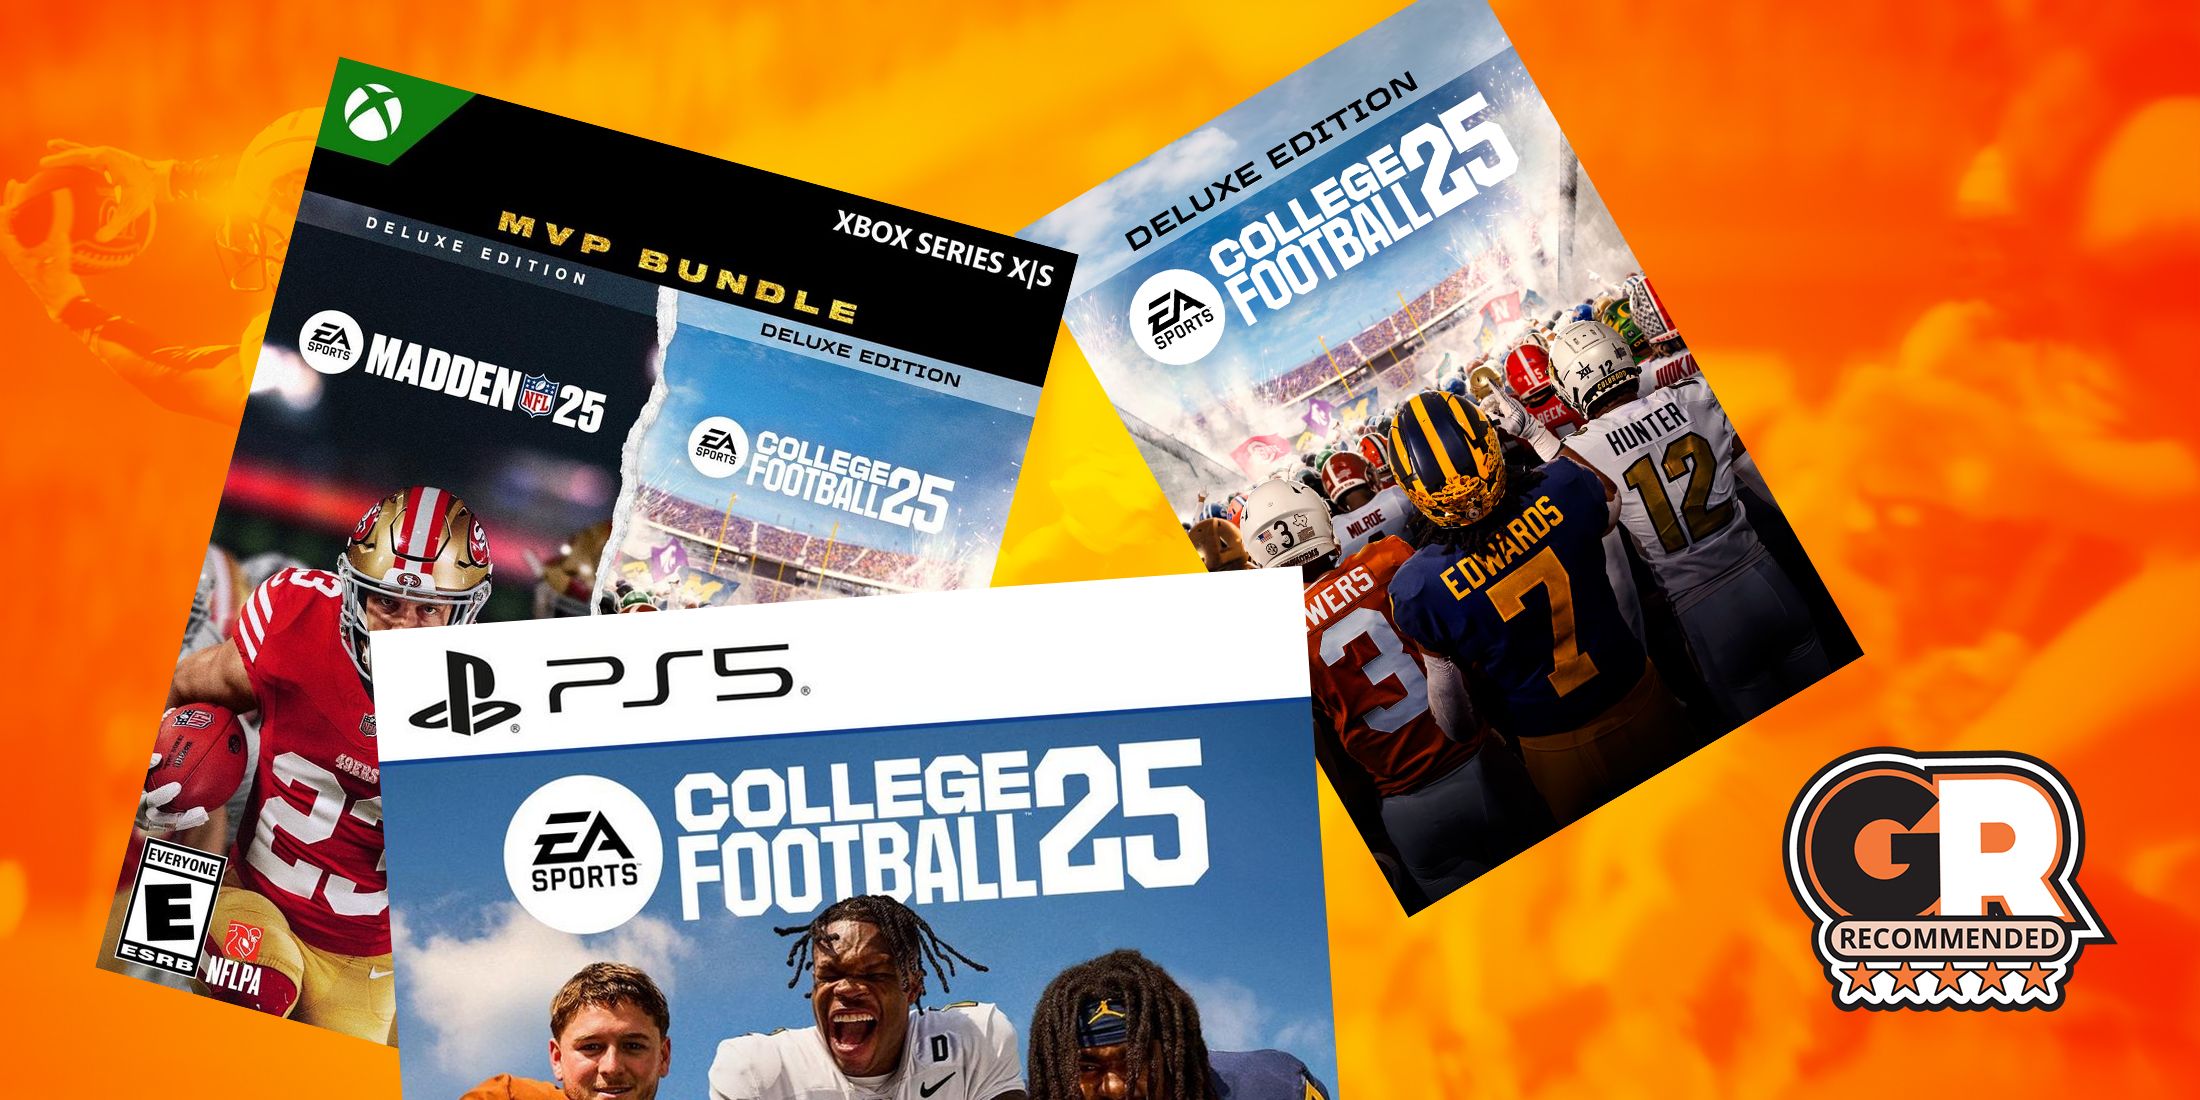 EA Sports College Football 25: Where And What Edition To Buy?